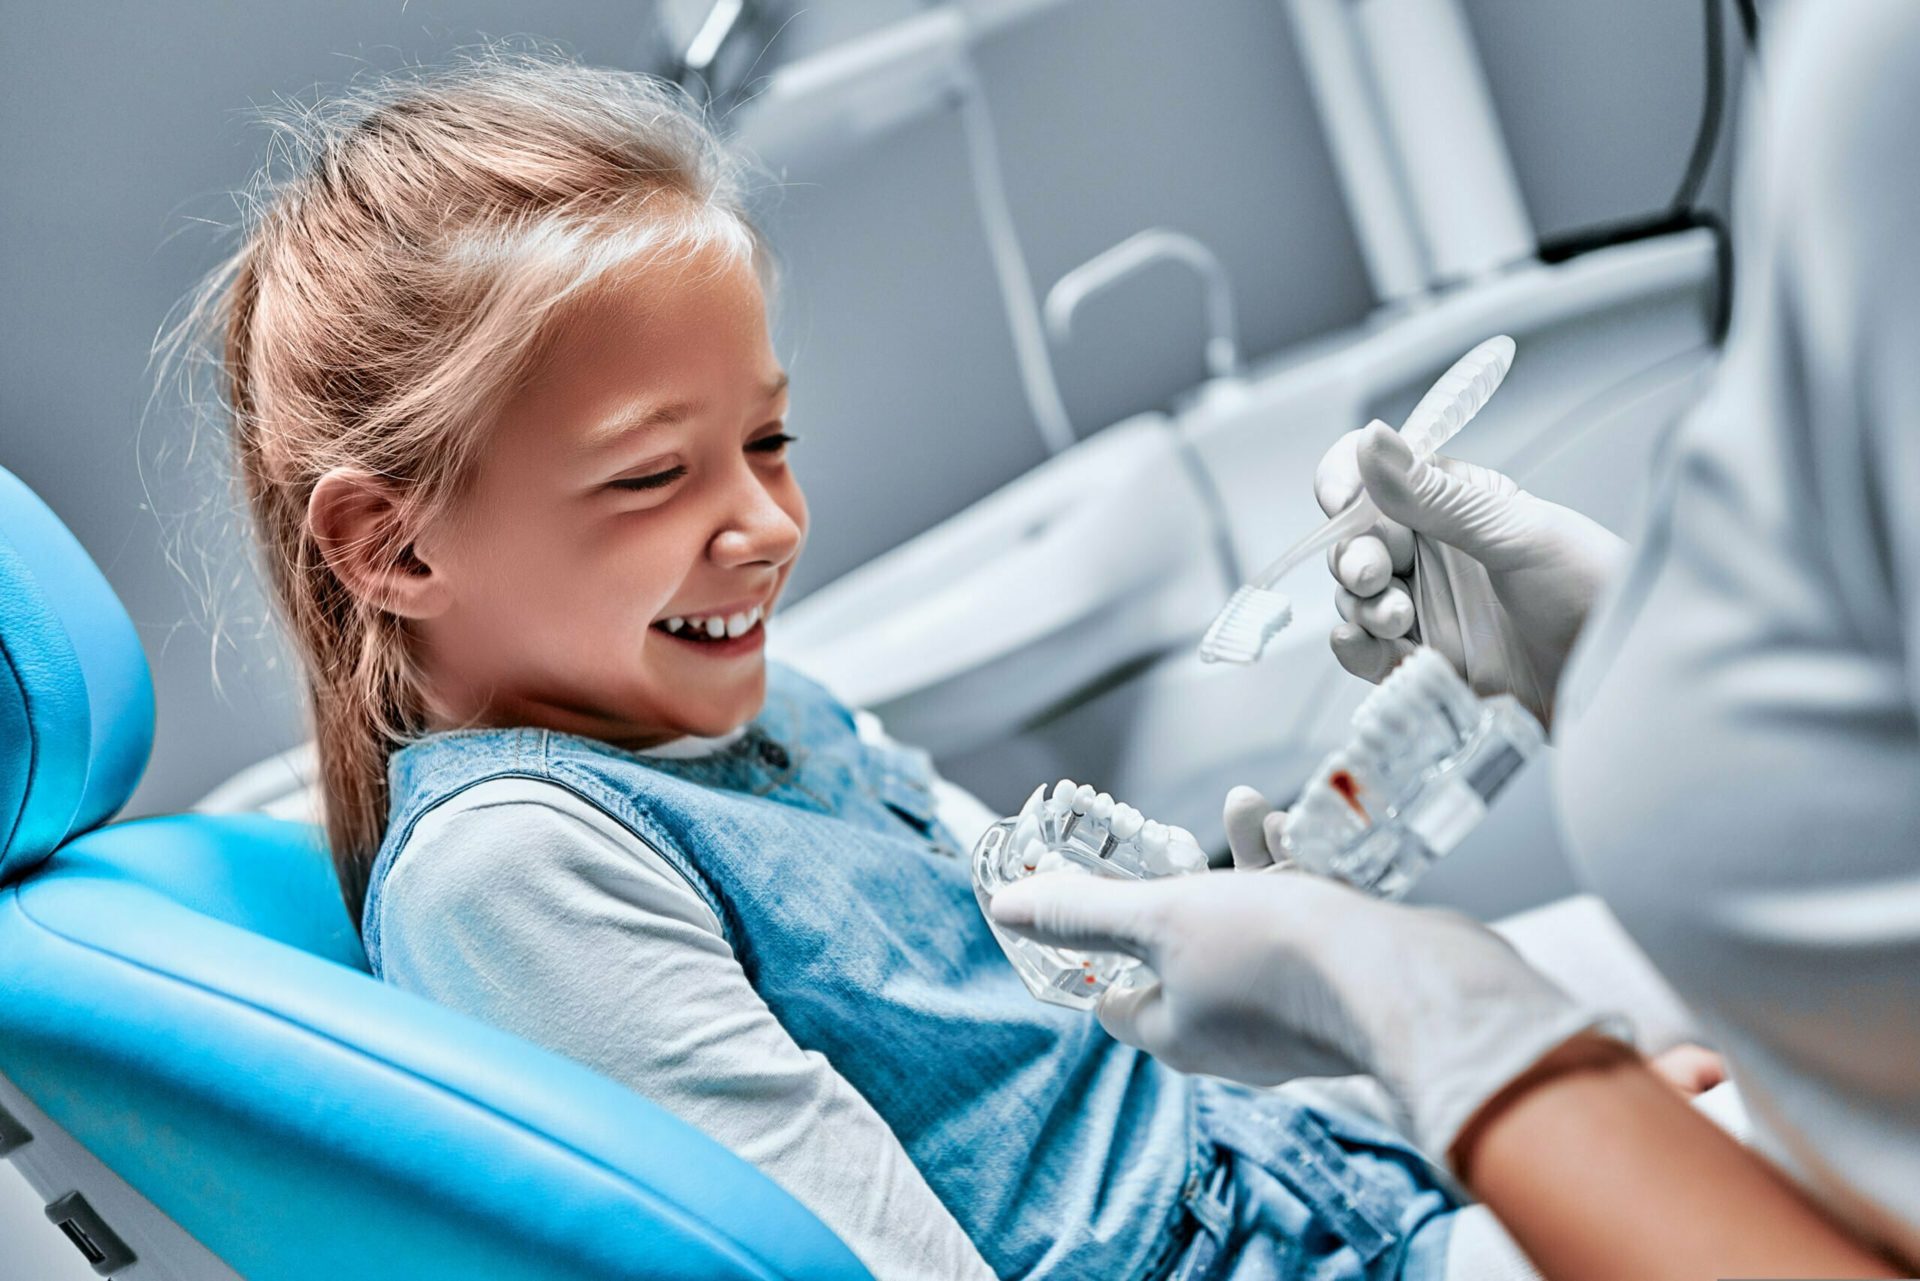 The dentist tells the child about oral hygiene and shows an artificial jaw and toothbrush